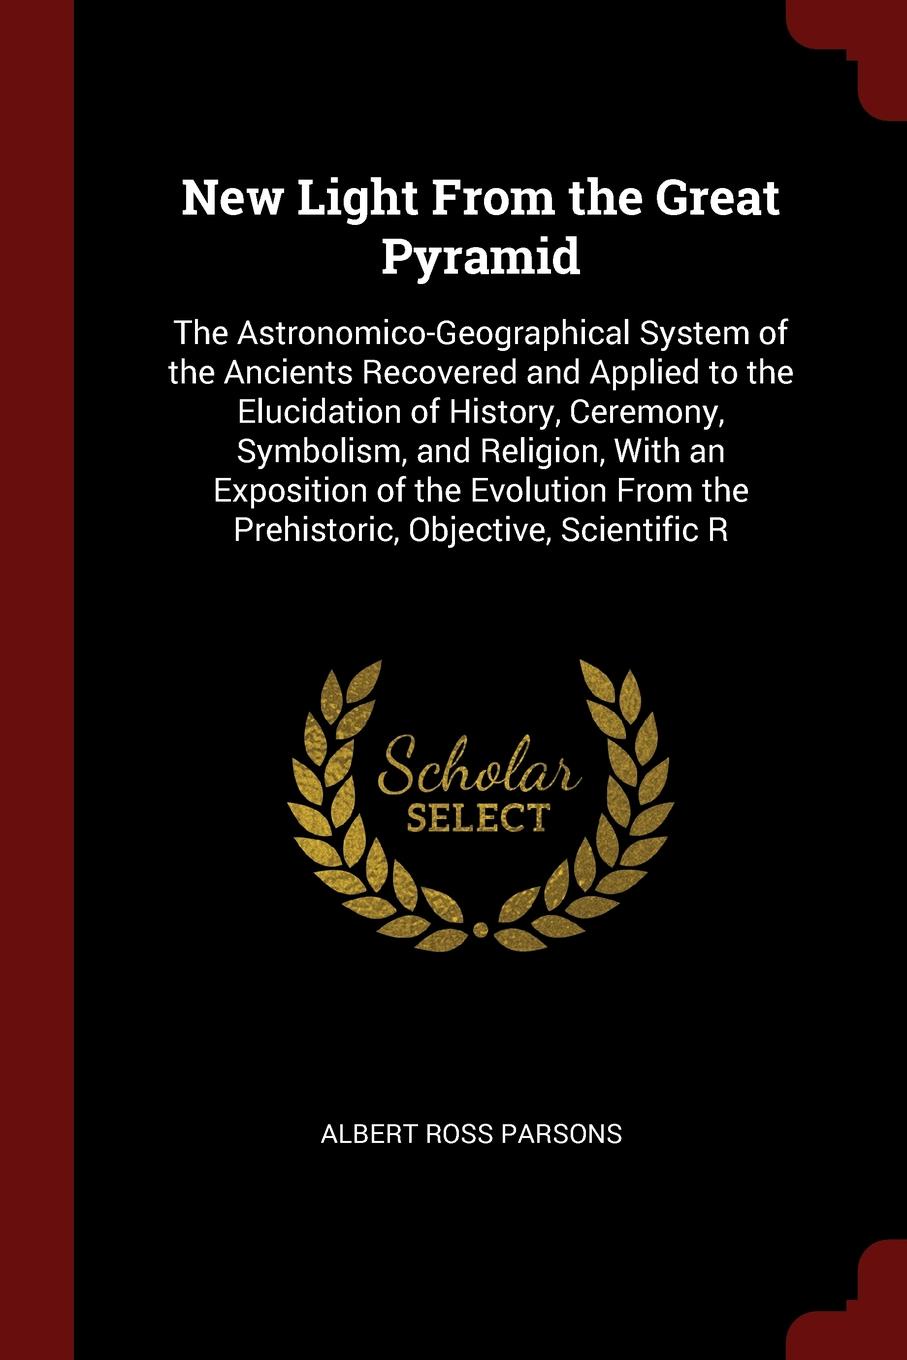 New Light From the Great Pyramid. The Astronomico-Geographical System of the Ancients Recovered and Applied to the Elucidation of History, Ceremony, Symbolism, and Religion, With an Exposition of the Evolution From the Prehistoric, Objective, Scie...